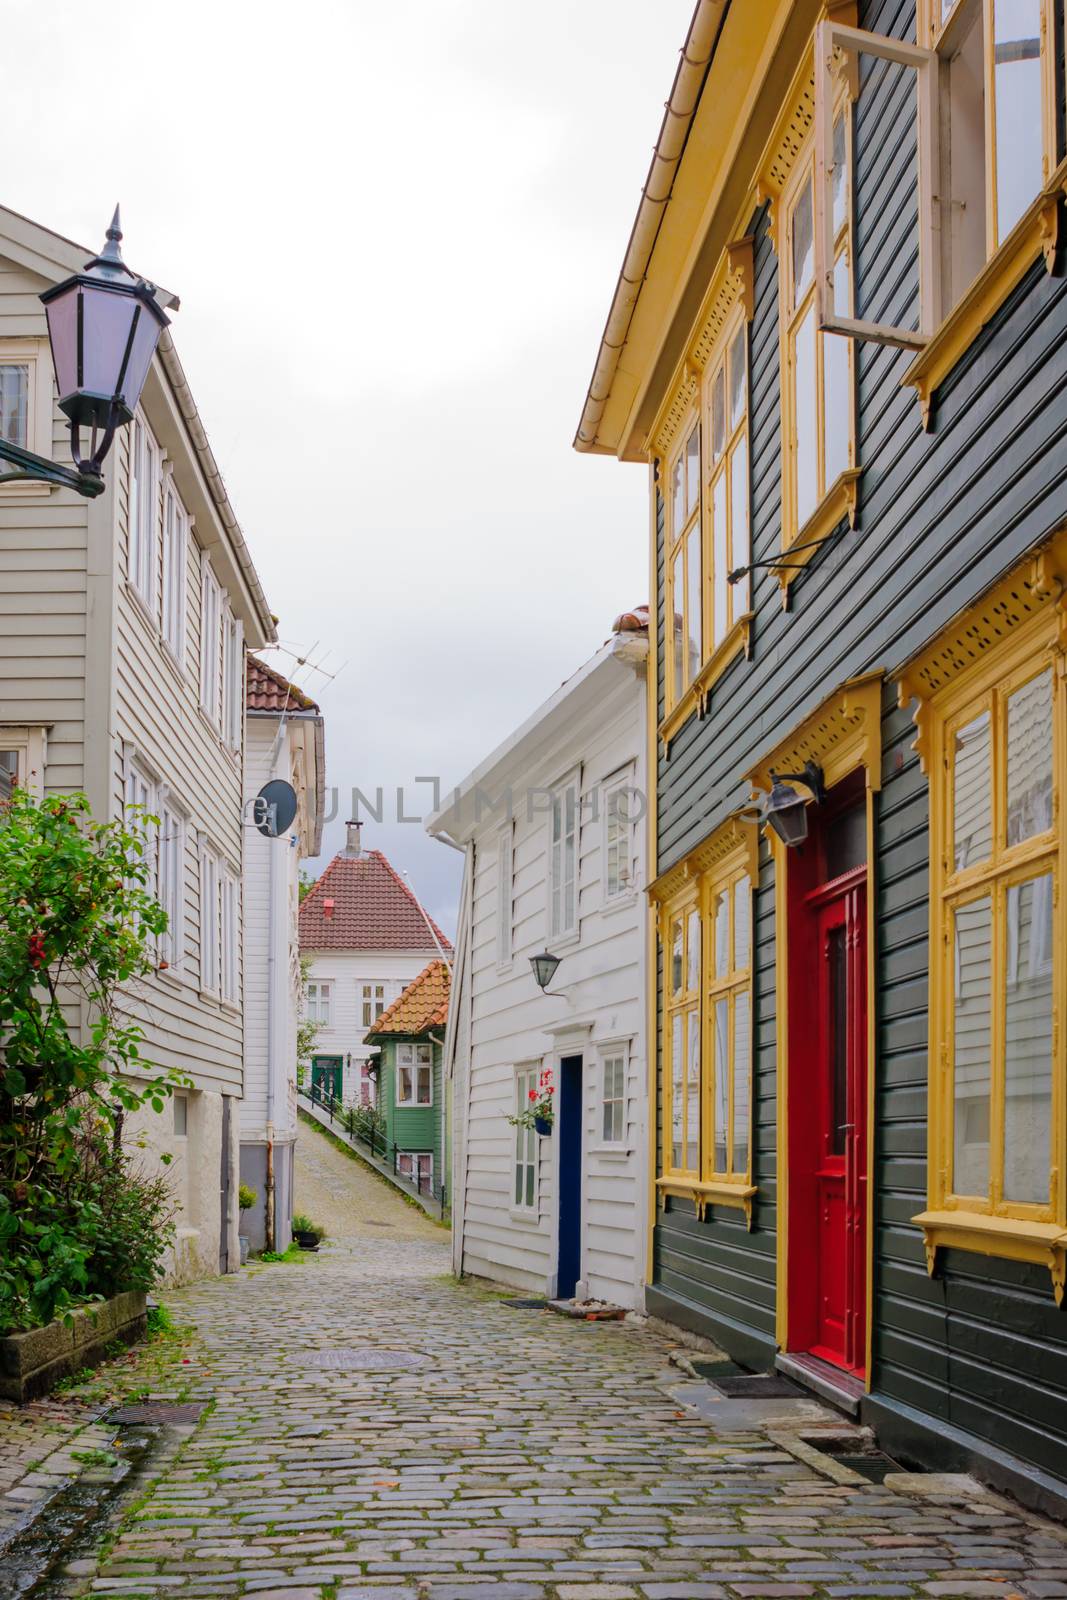 View of an alley in the old city, in Bergen, Norway